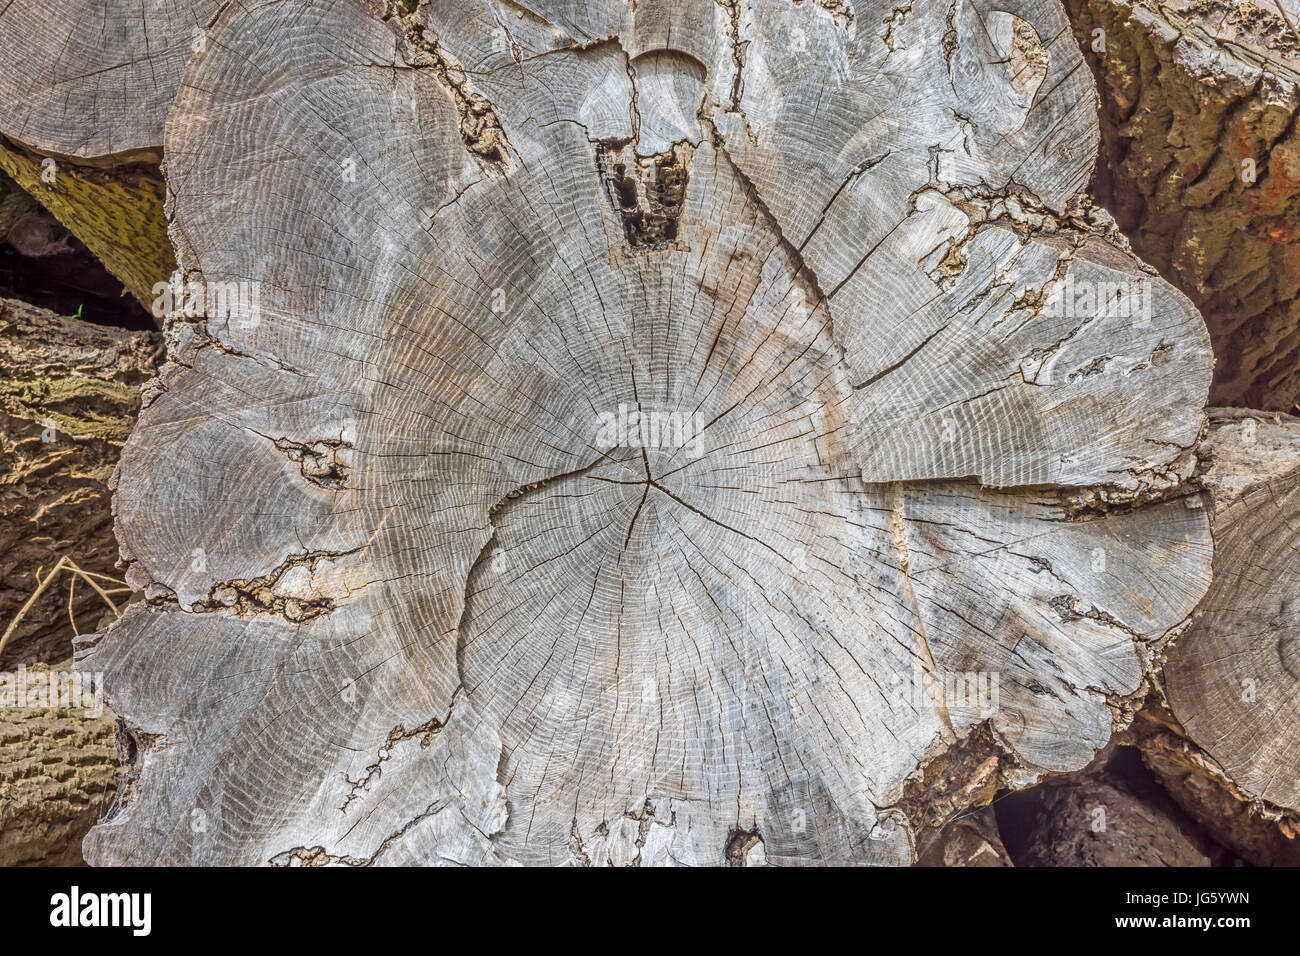 200 year old pine tree cross section Stock Photo